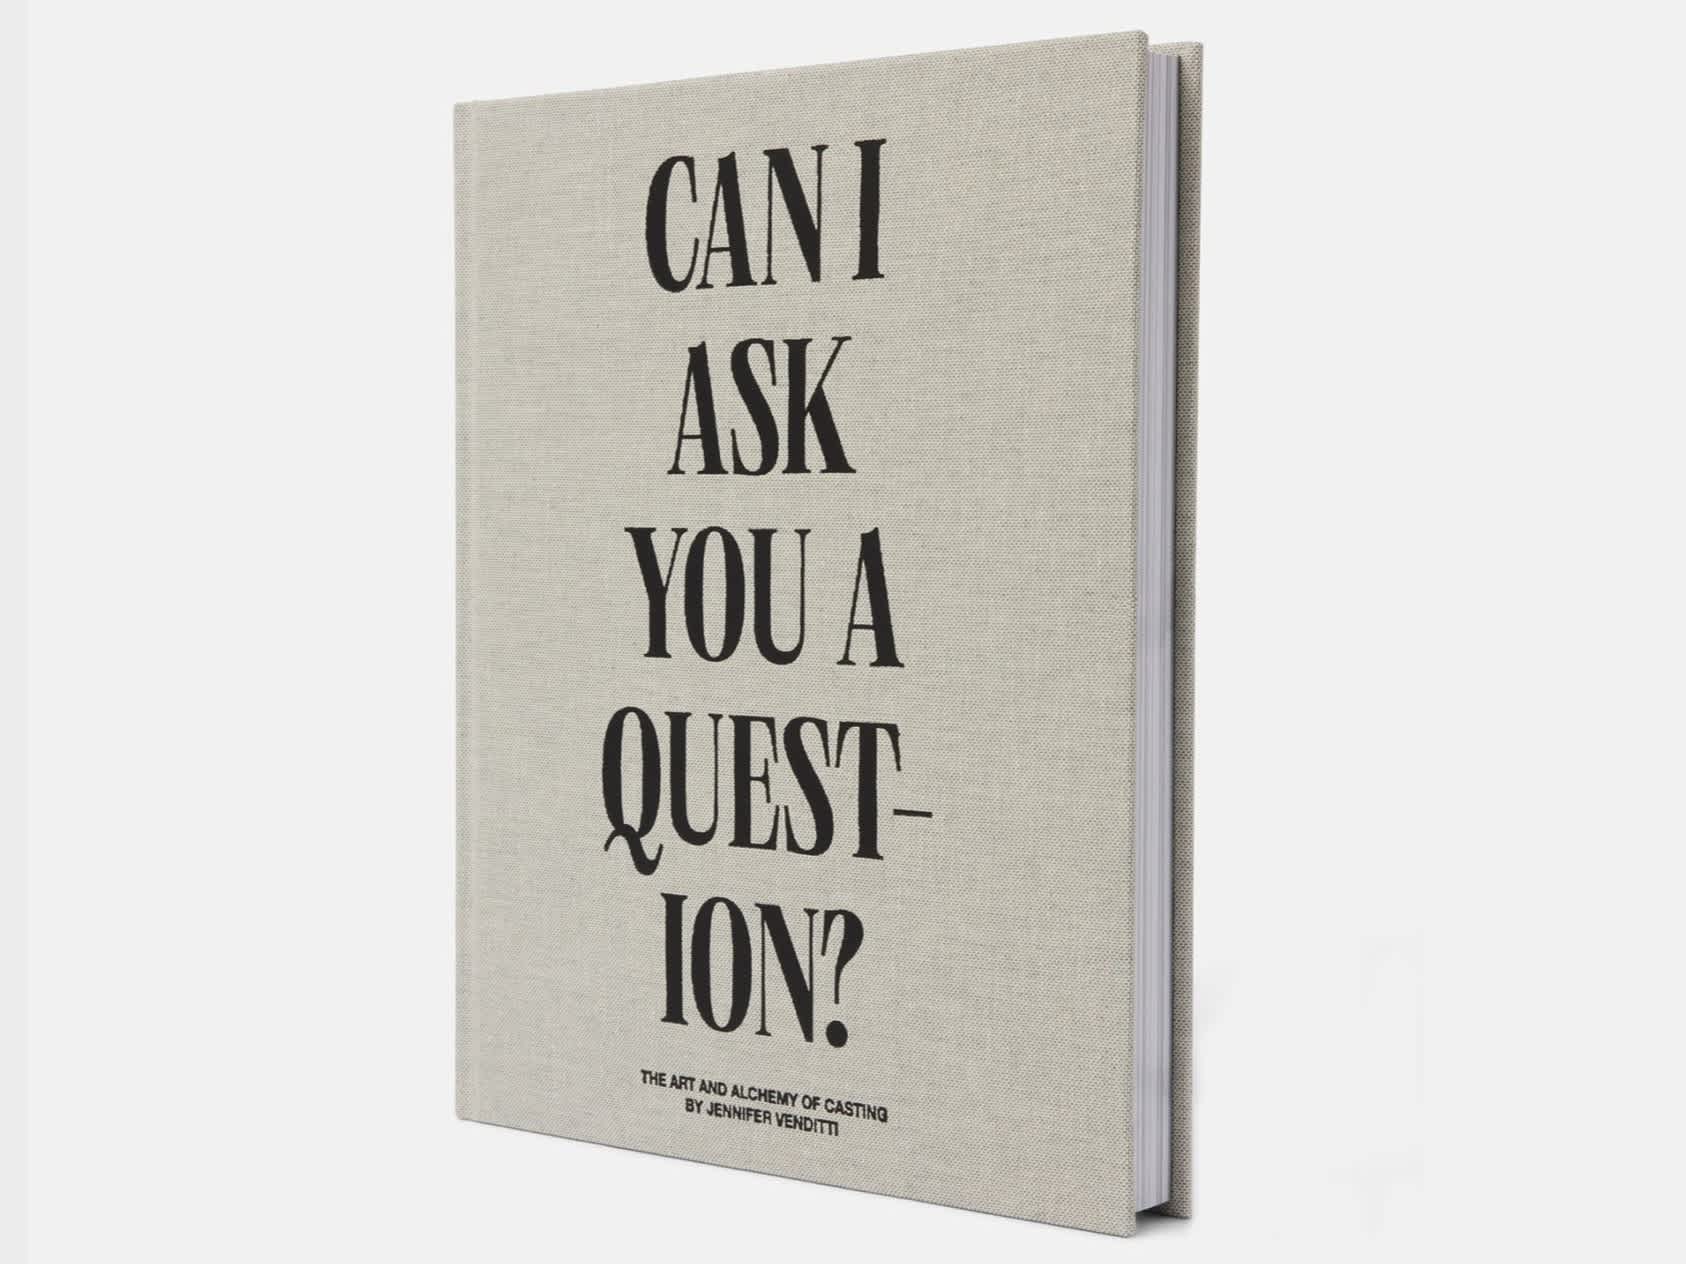 Book with gray woven cover and the title "Can I Ask You A Question?" embossed in black. The book is turned 1/4 so as to see the pages.